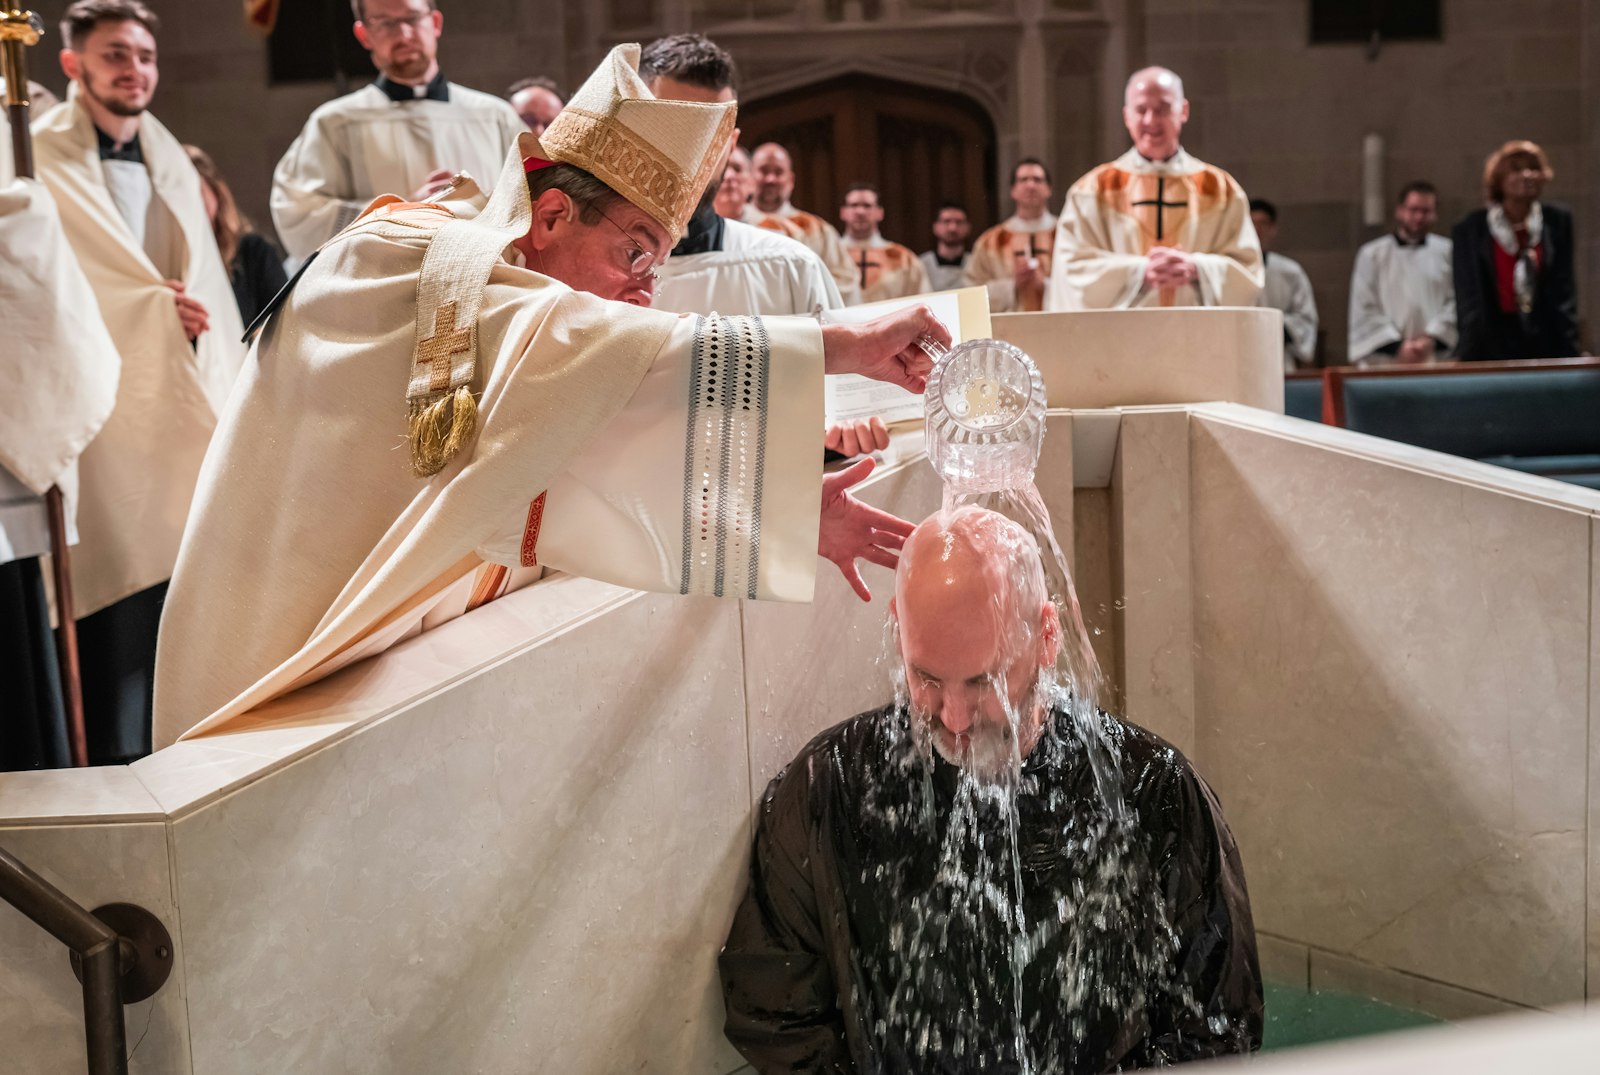 Archbishop Vigneron pours water over Brian Mull, baptizing him into the Catholic faith during the Easter vigil. Mull joined OCIA in November 2022, but his journey toward becoming Catholic really began two years ago when he was hired by Blue Rock Technologies to work as an on-site technician at the Archdiocese of Detroit’s Chancery in downtown Detroit.